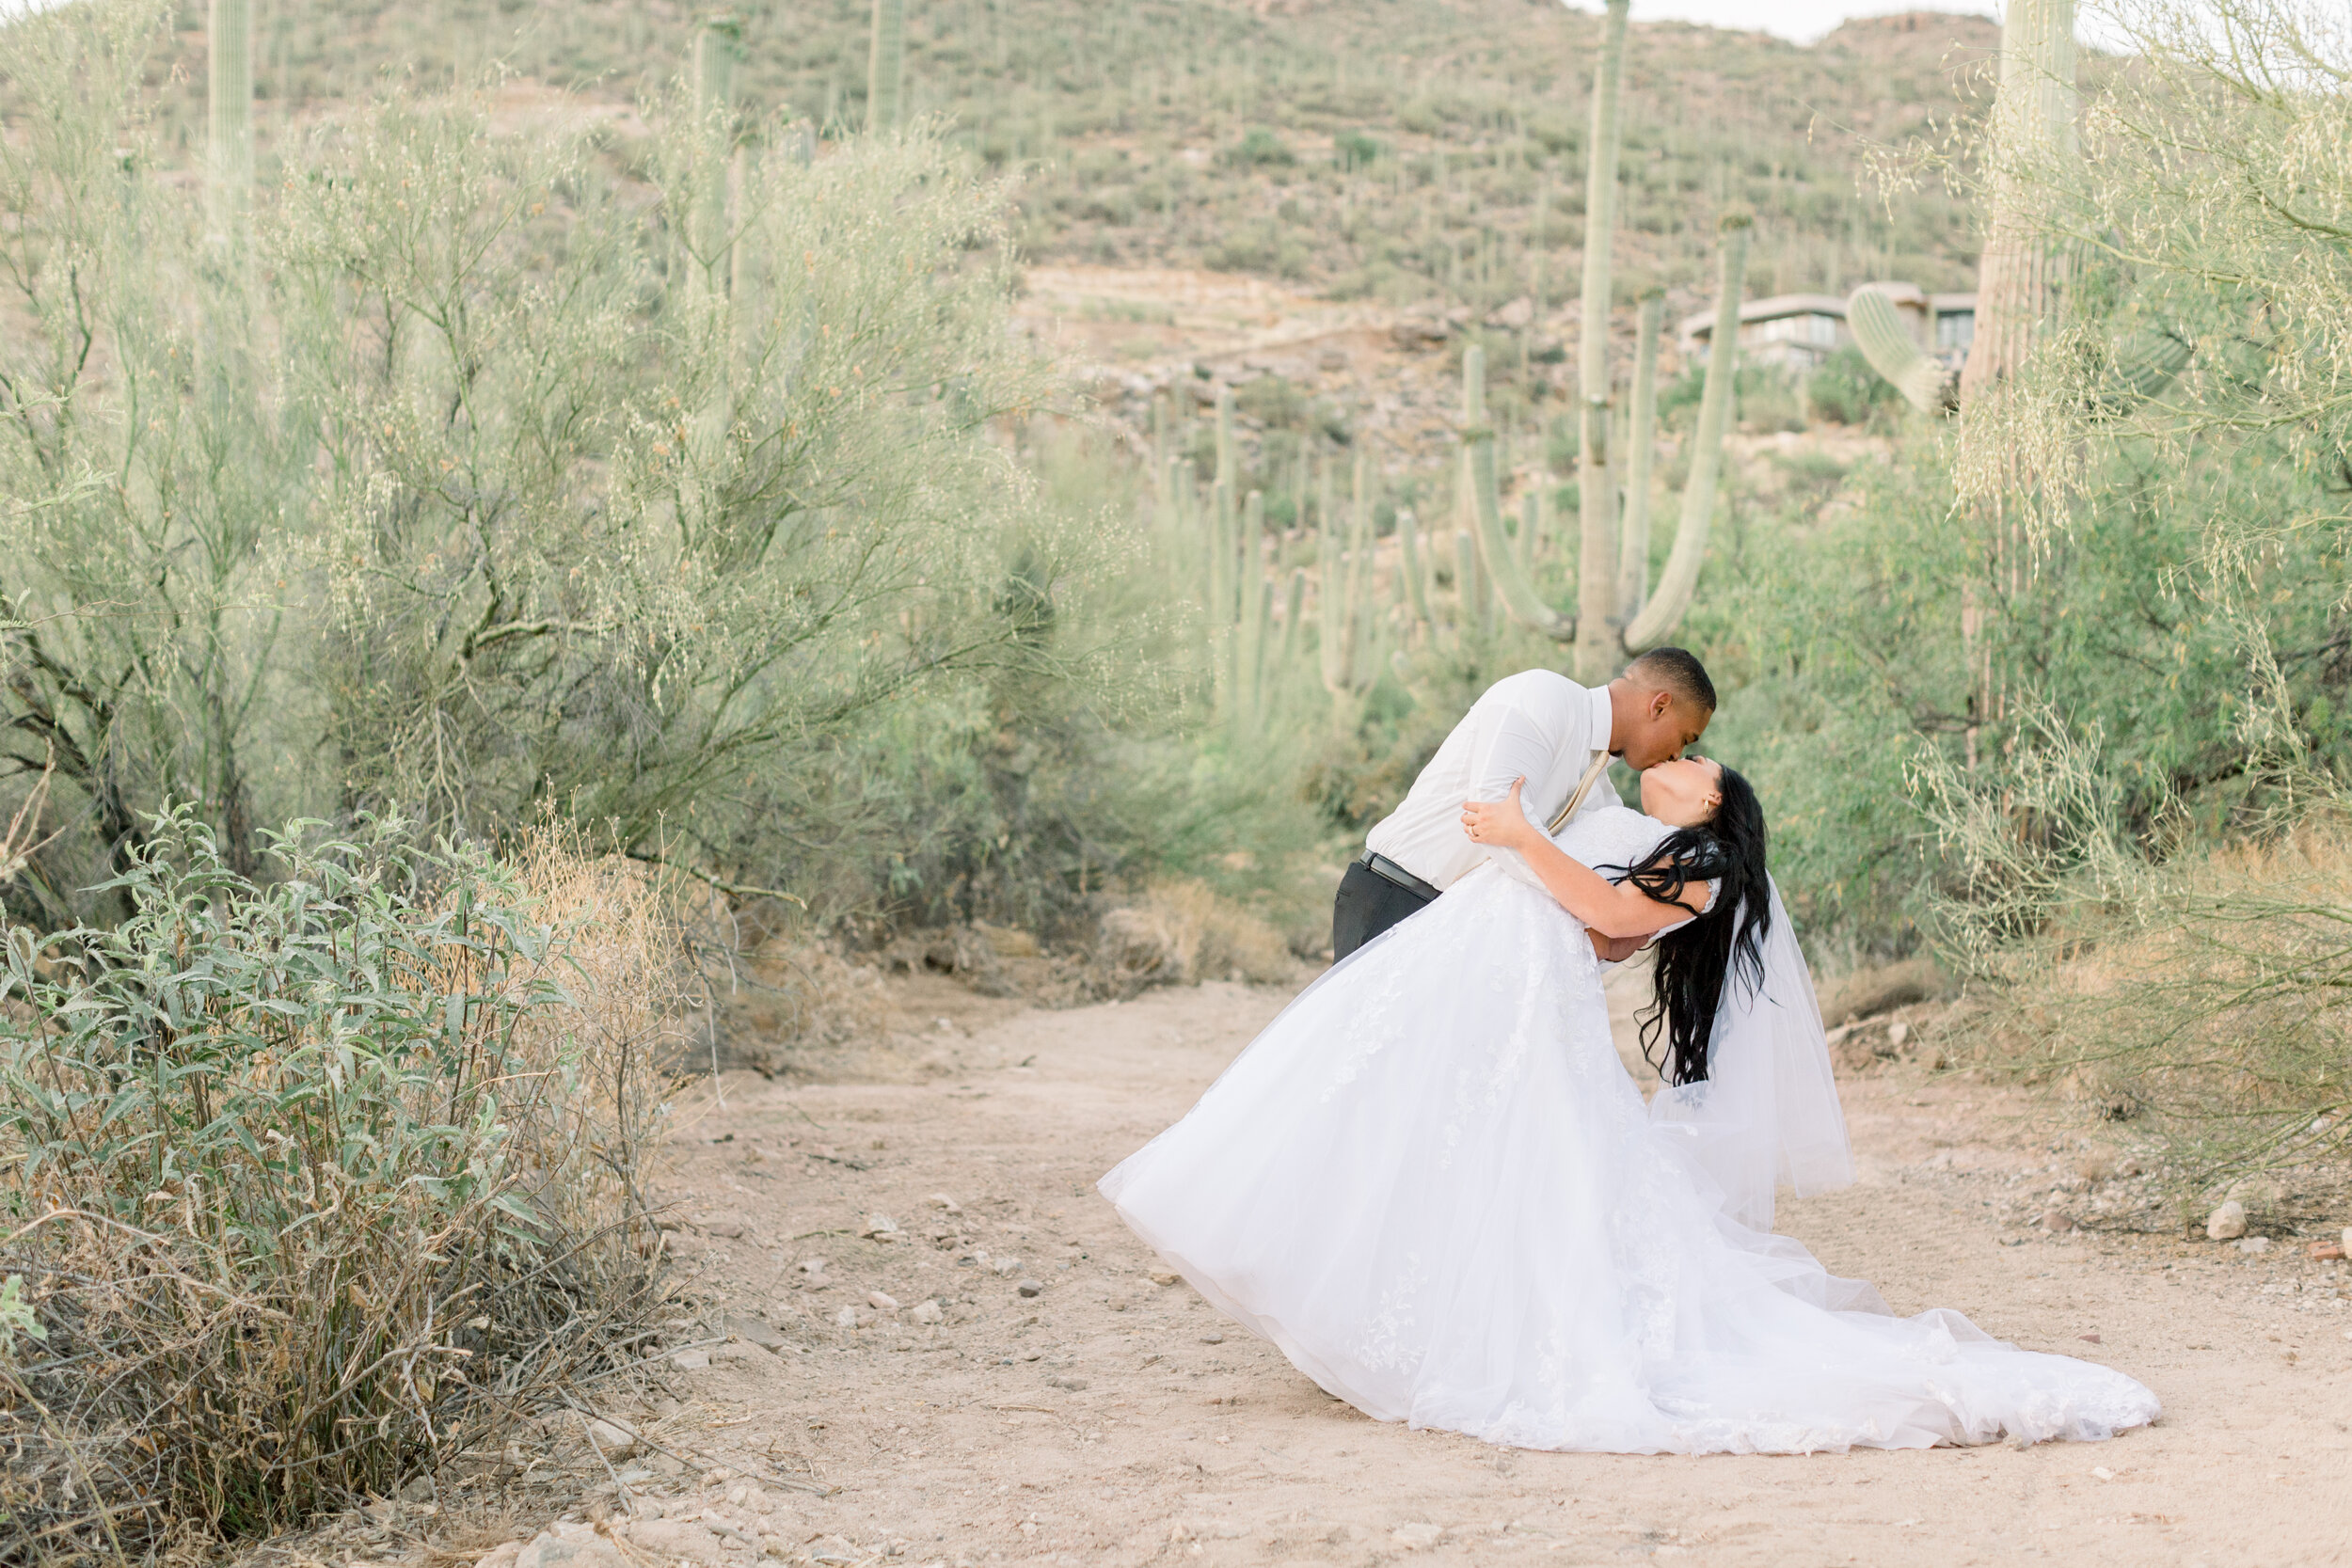 Bride and Groom share a kiss surrounded by saguaros in Tucson Arizona.